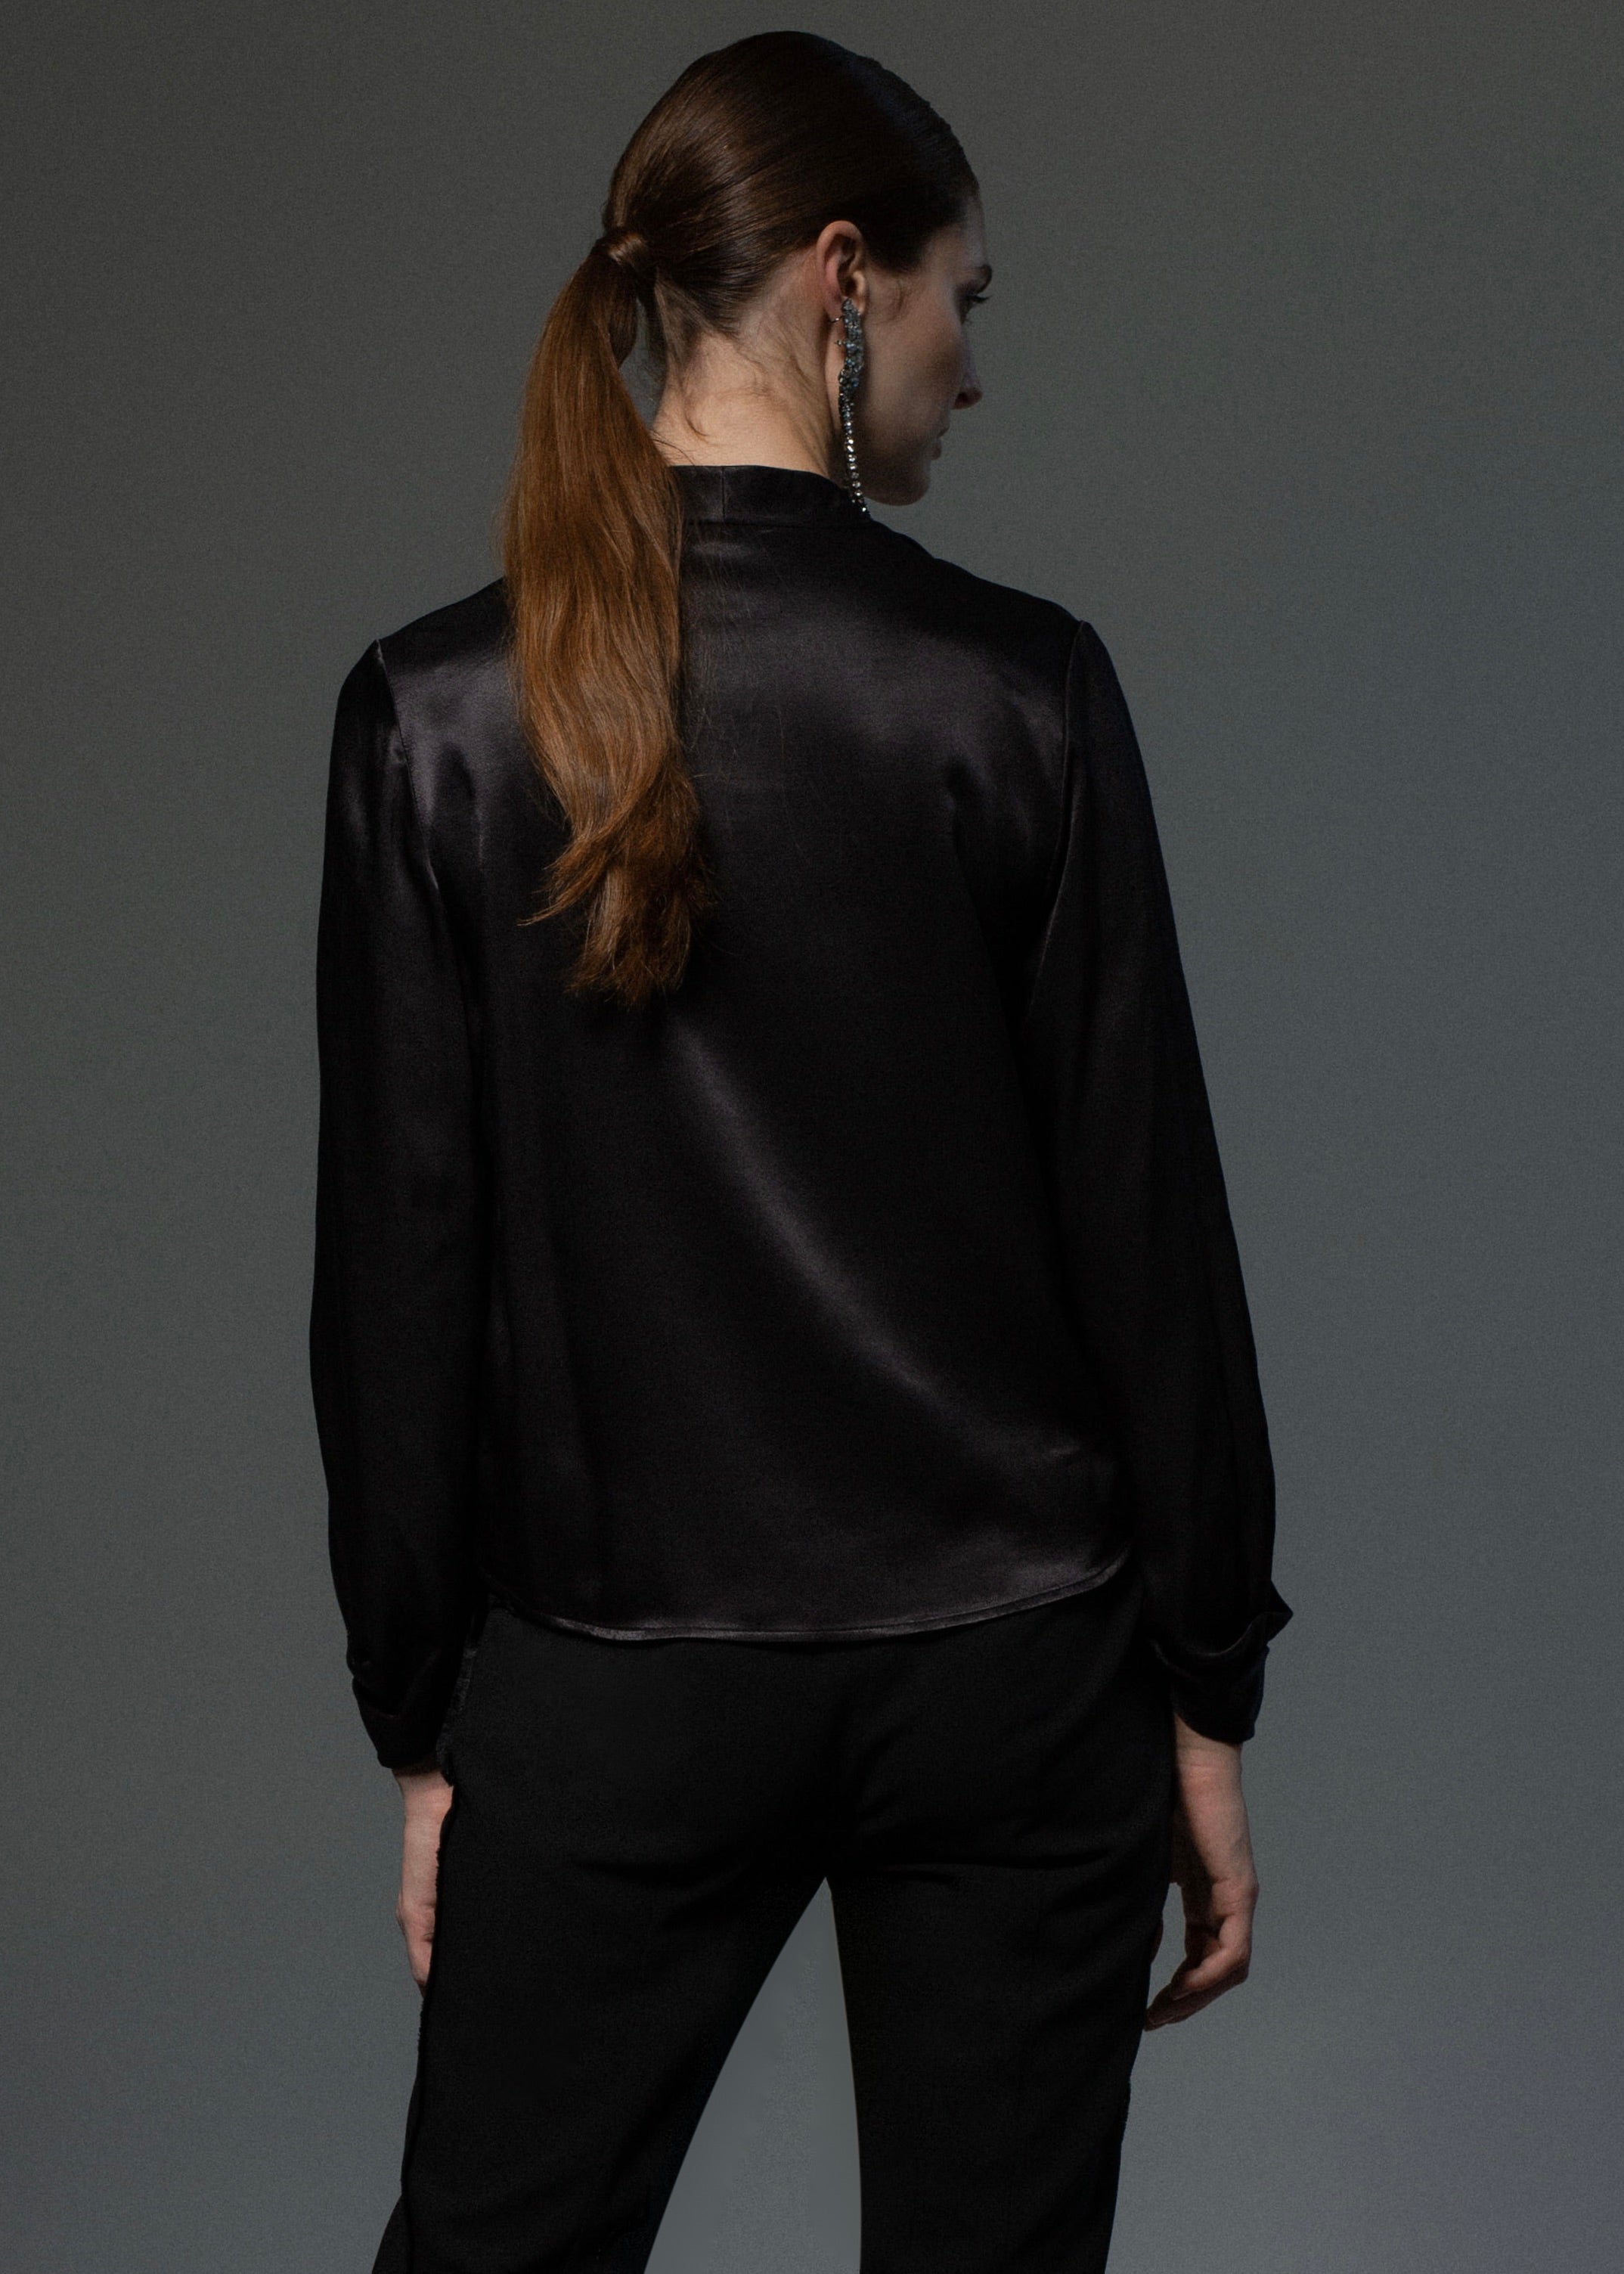 Viscose blouse with crossover front Black